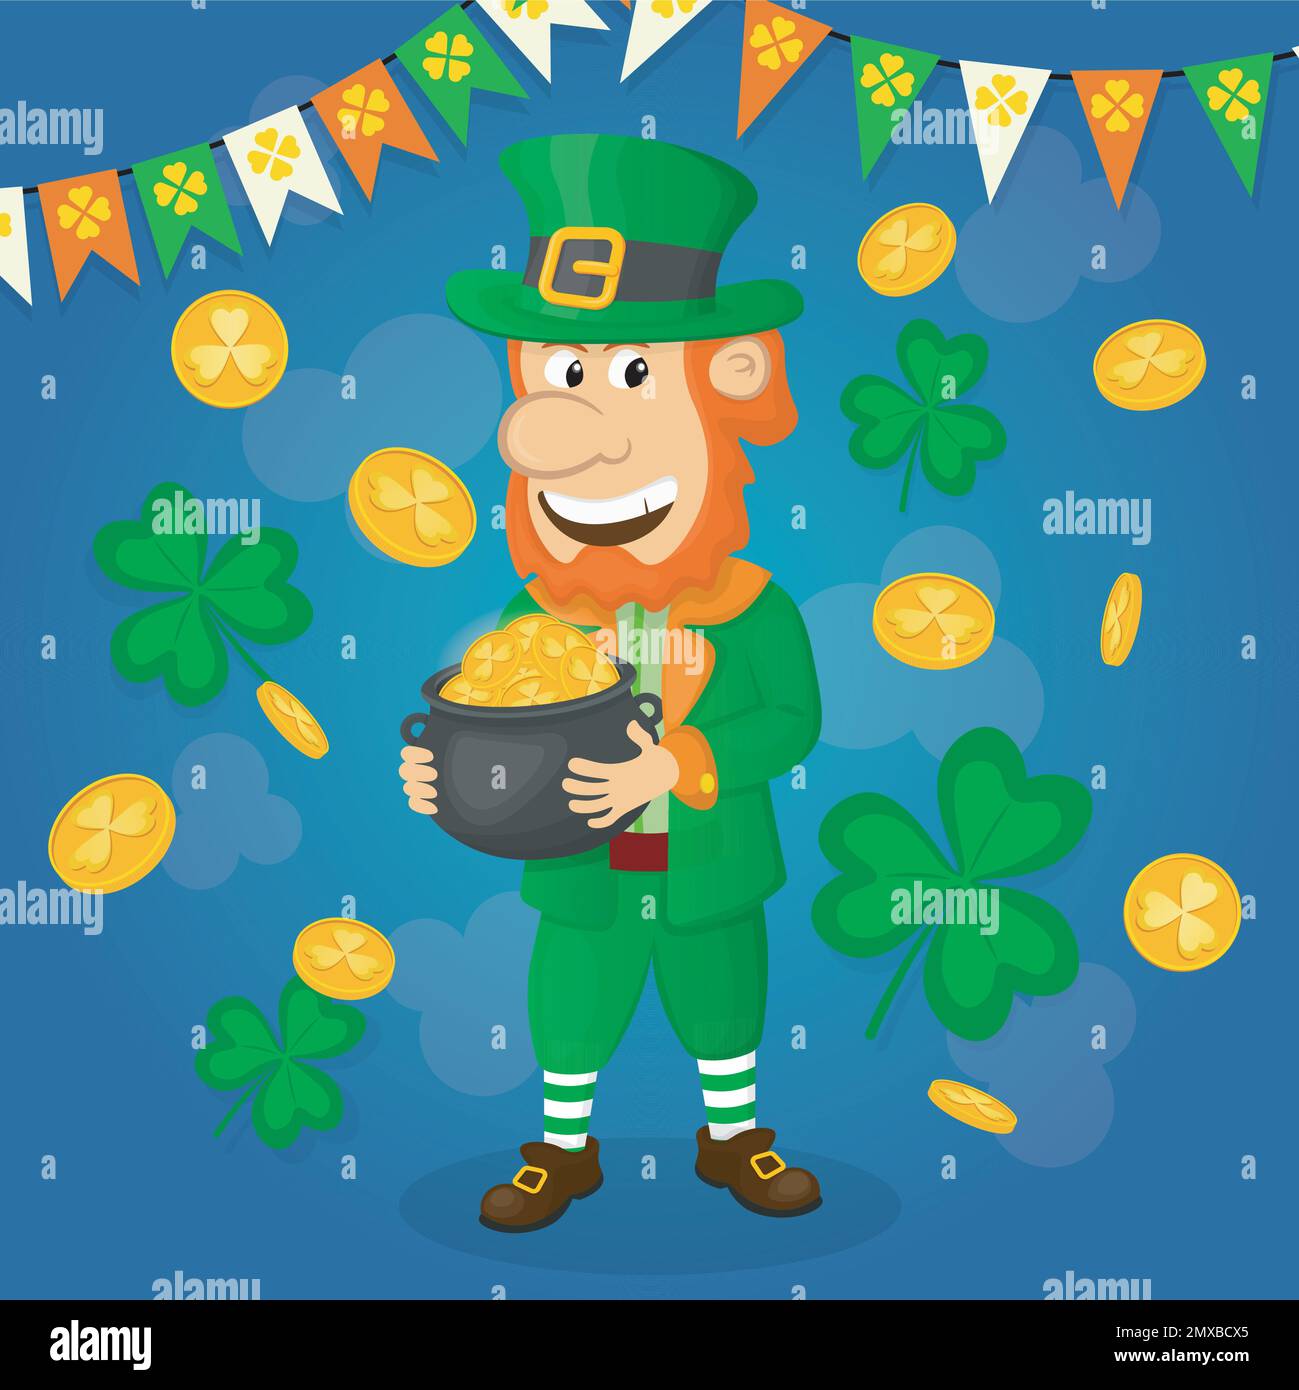 saint patricks day banner with gold coins, flags garland, shamrocks leaves and patricks character Stock Vector